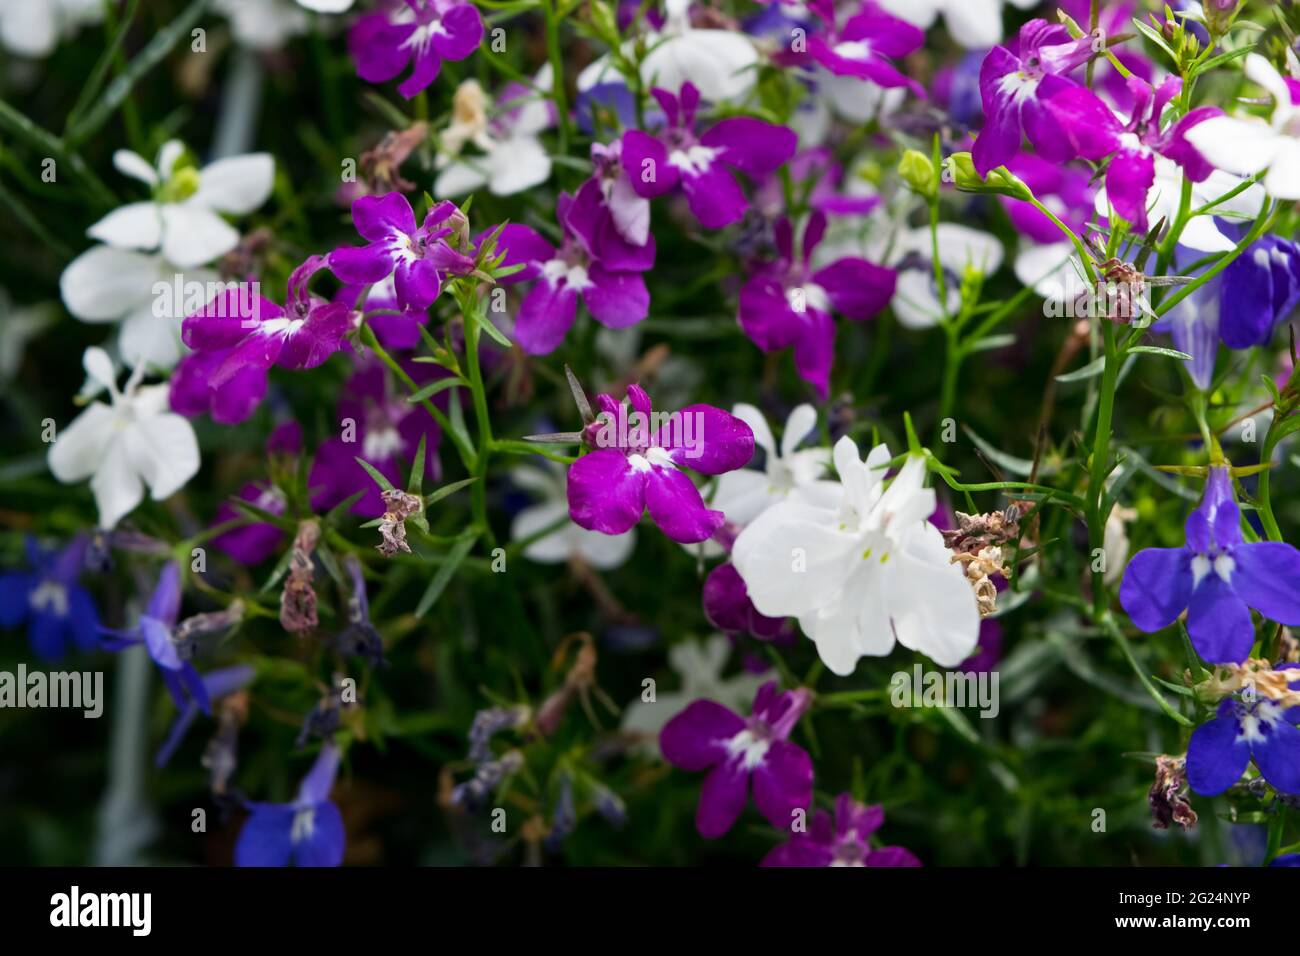 A close up of a multicolored edging lobelia plant, with its distinctive petals. Stock Photo